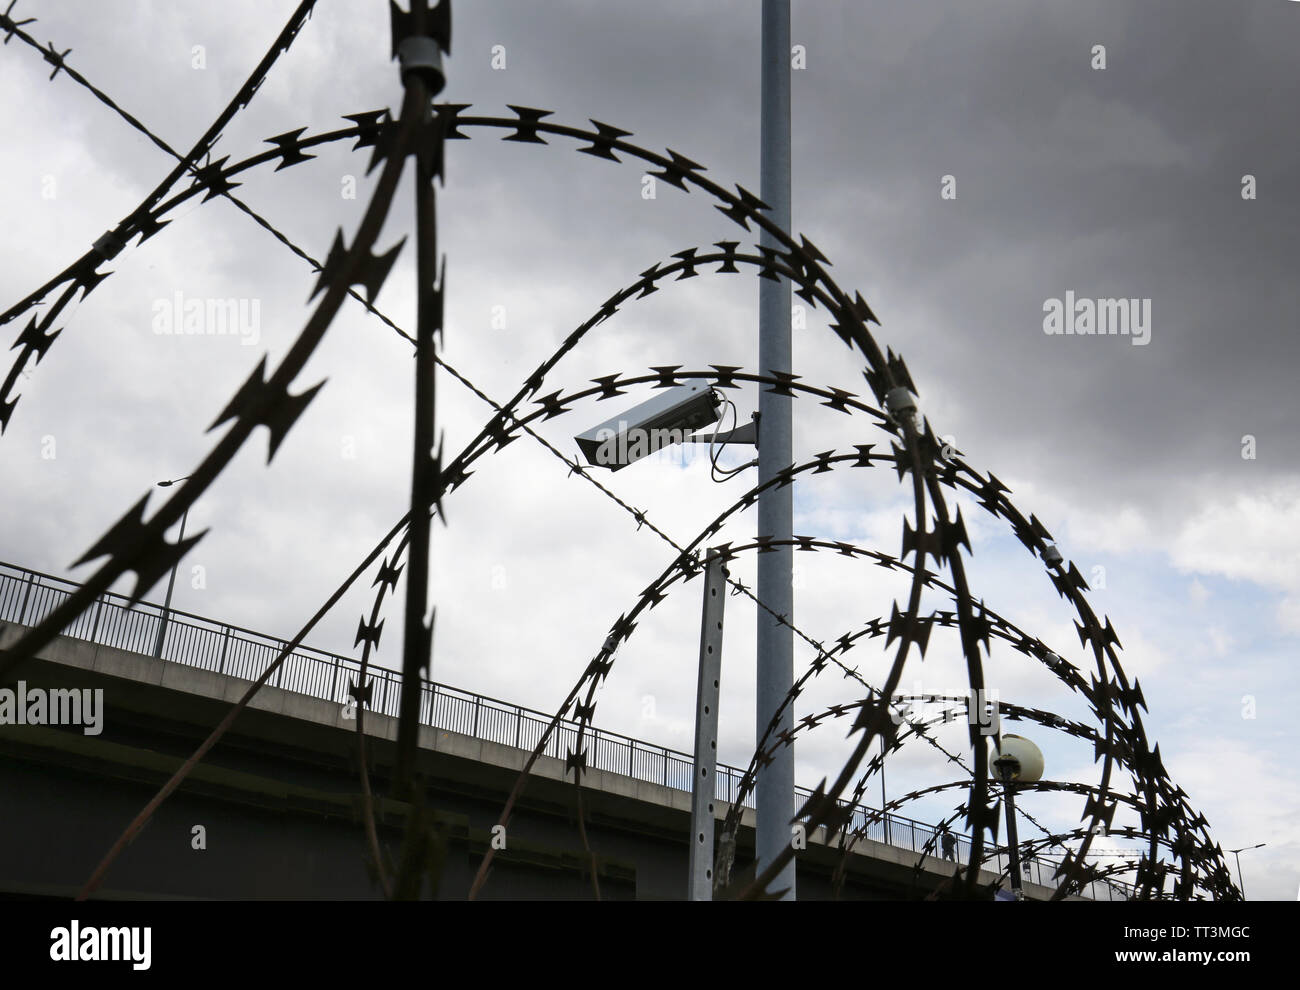 Close-up of razor wire and barbed wire surounding a secure compound in east London, UK. Shows security camera and lighting. Road viduct beyond. Stock Photo